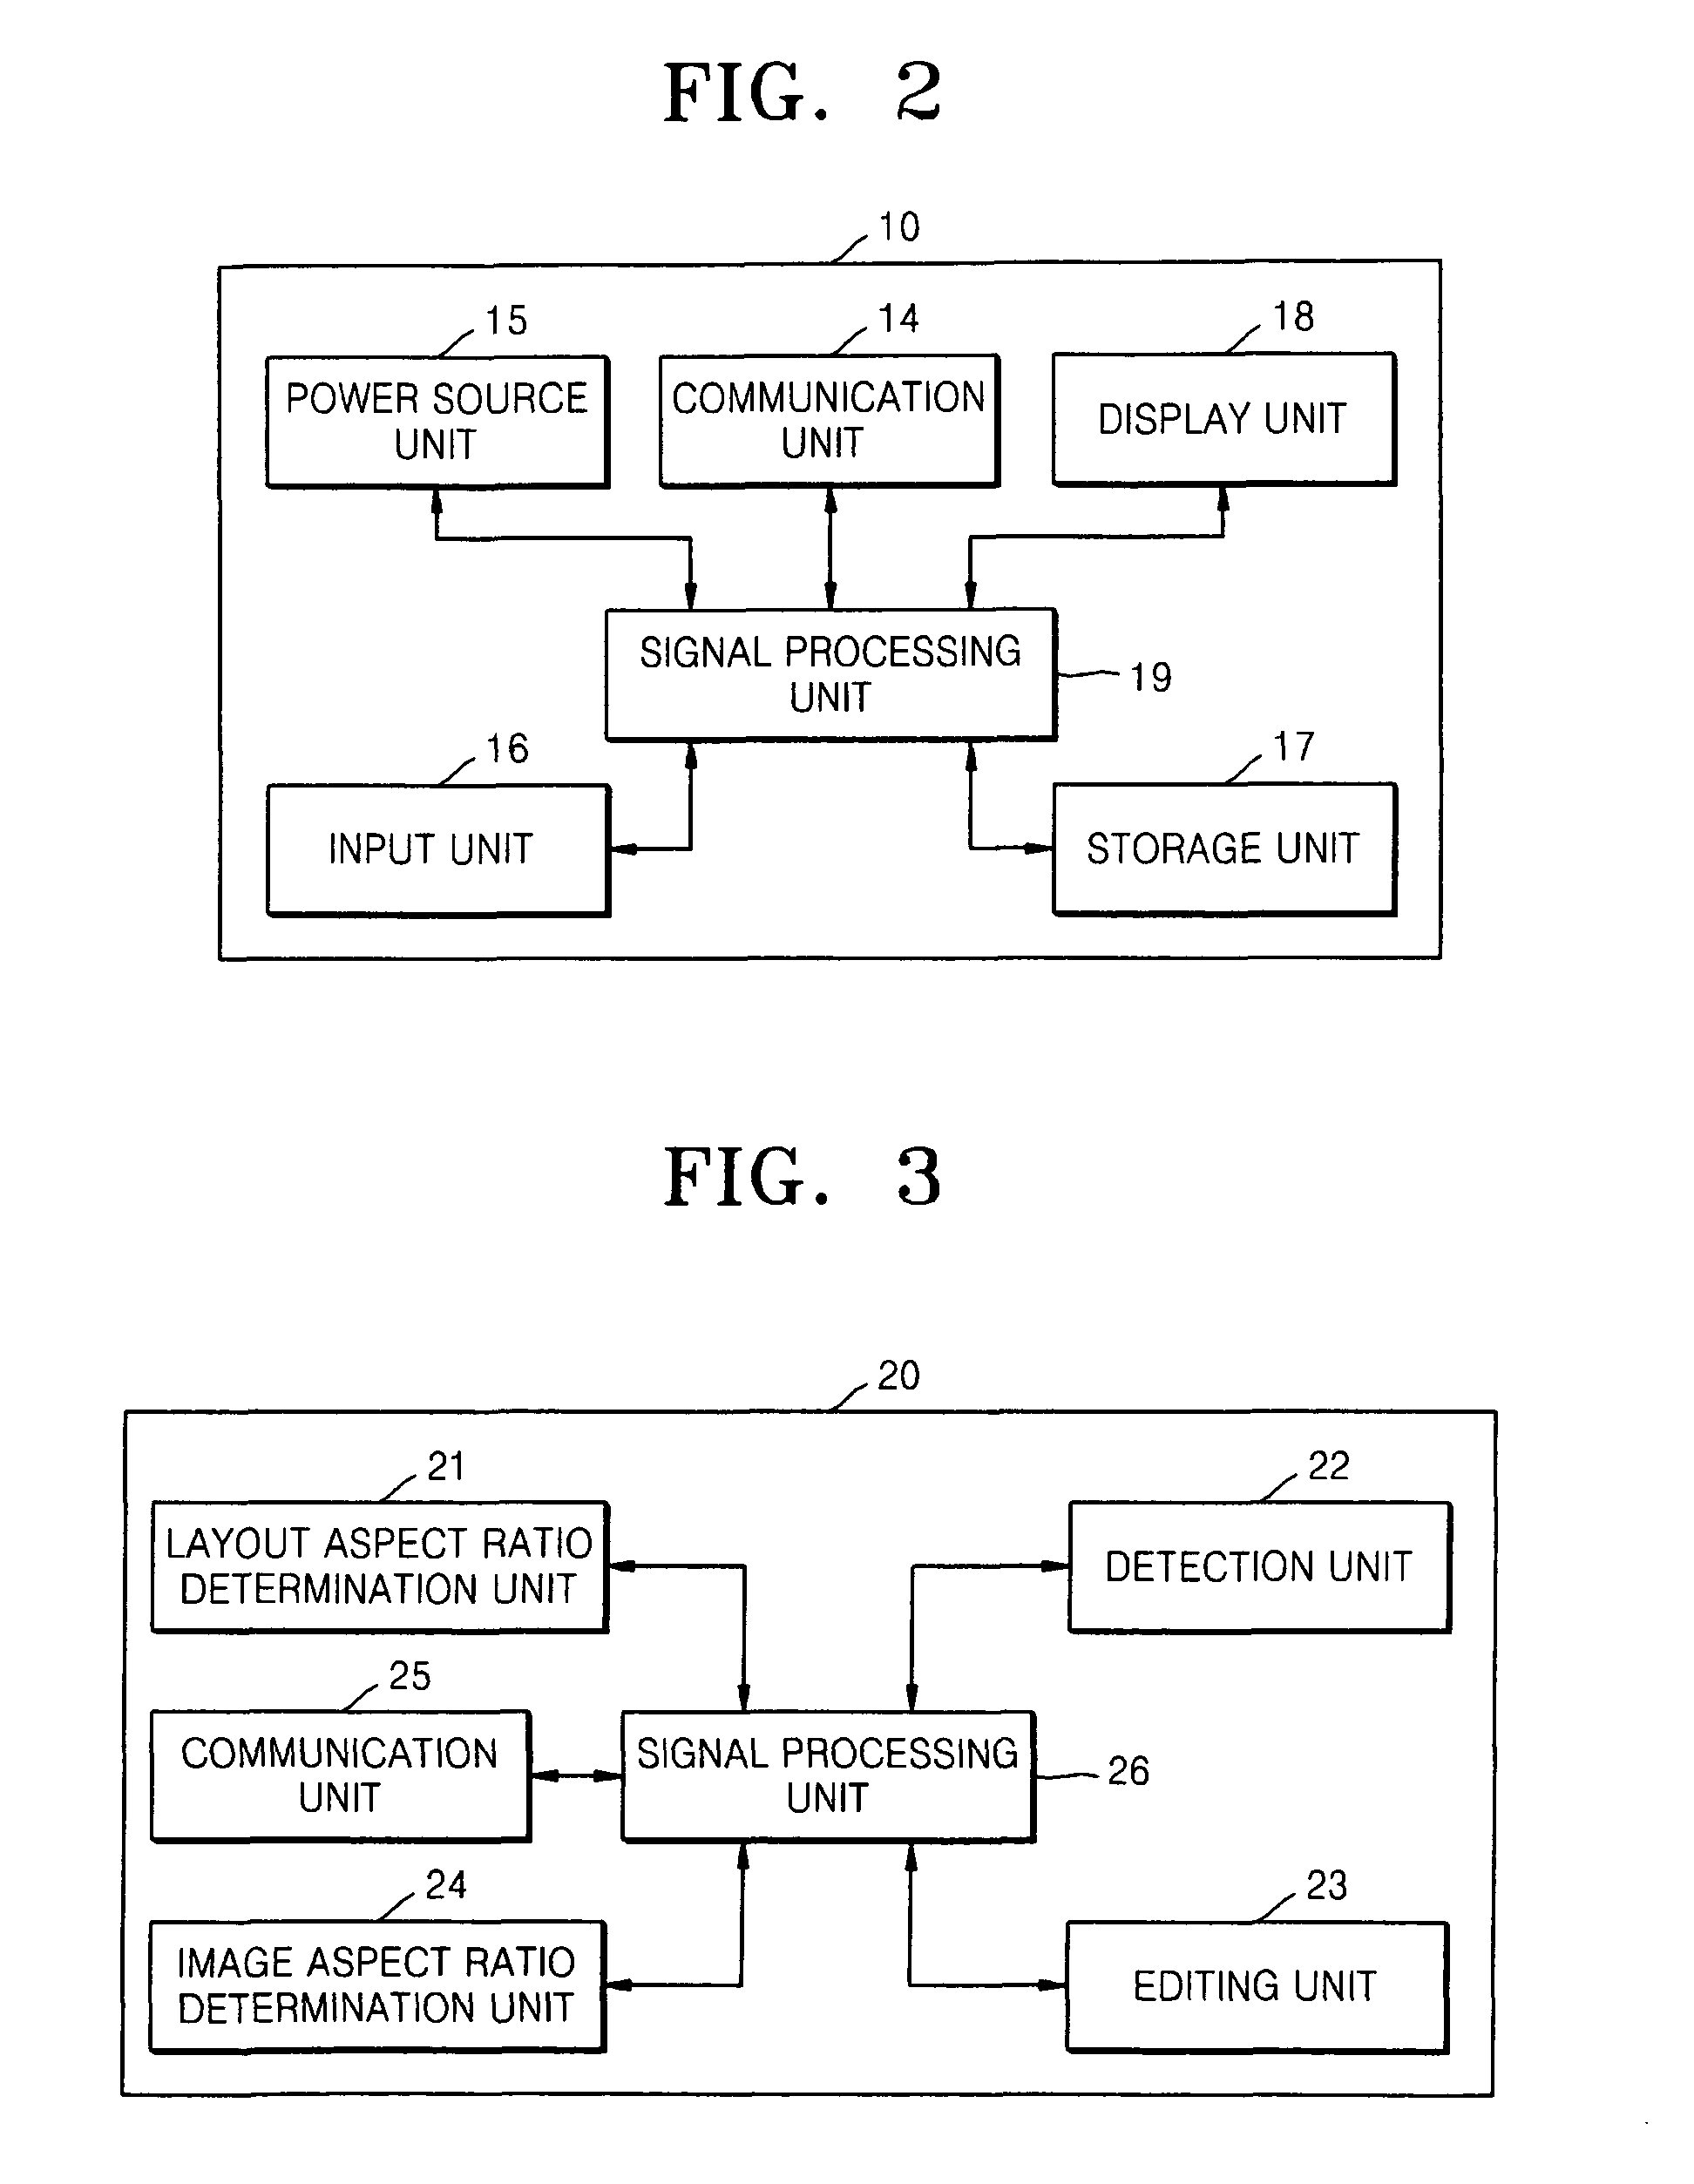 Image display system and method to identify images according to an aspect ratio of an editing layout